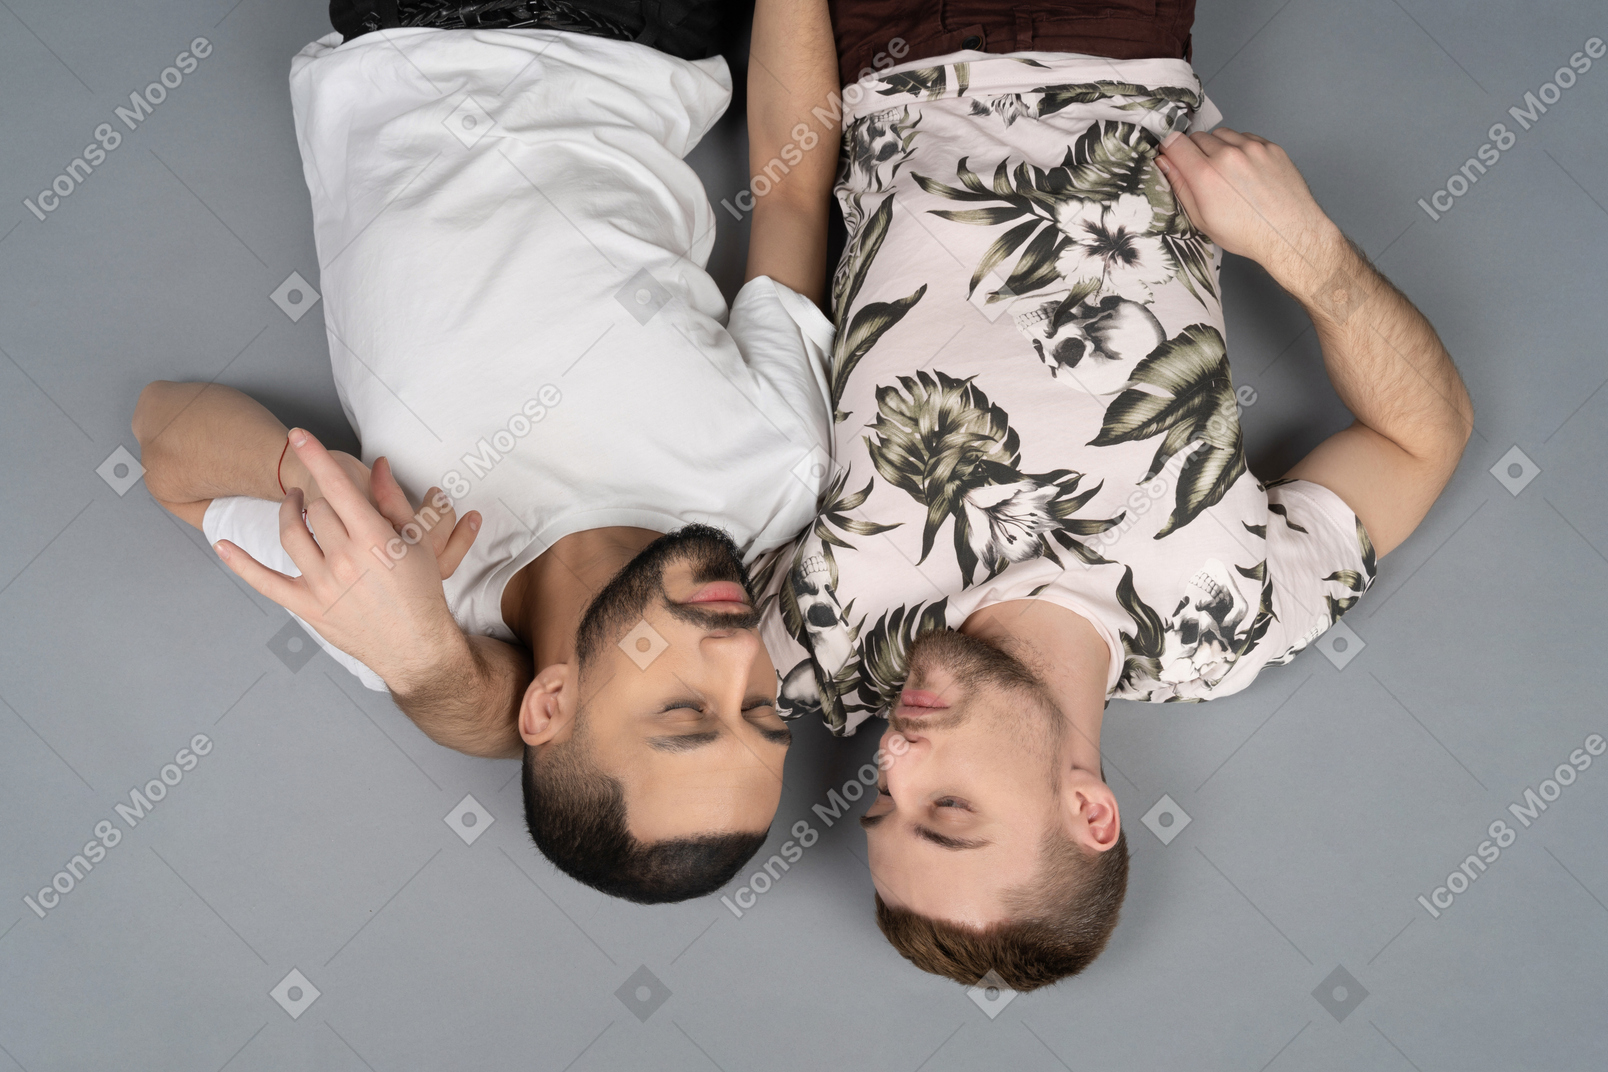 Flat lay of two young caucasian men lying on floor close to each other